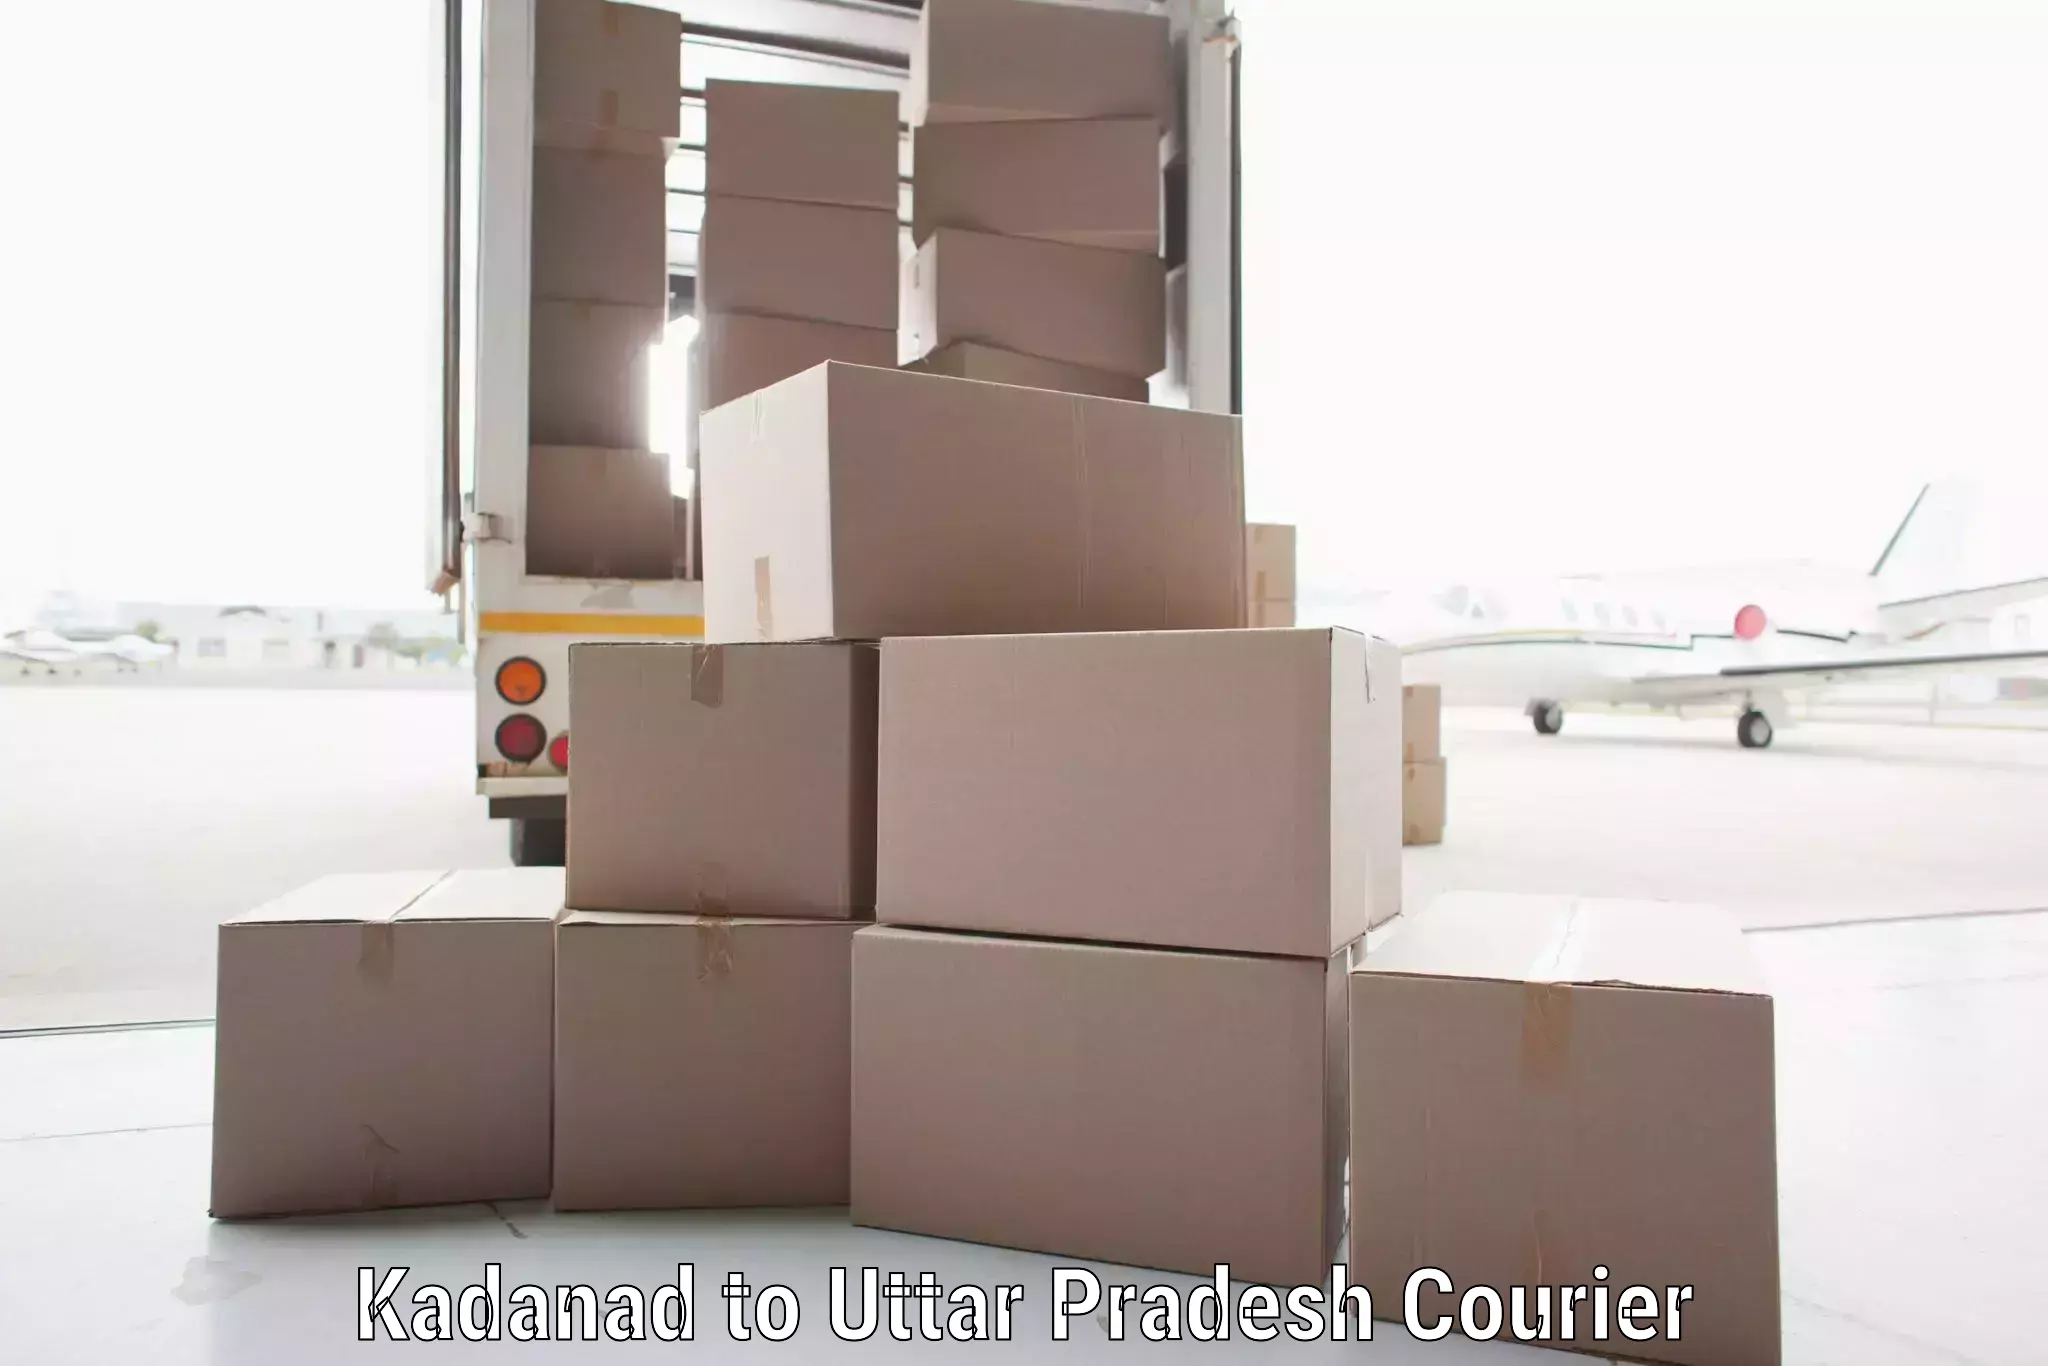 Cost-effective courier options Kadanad to Kanth